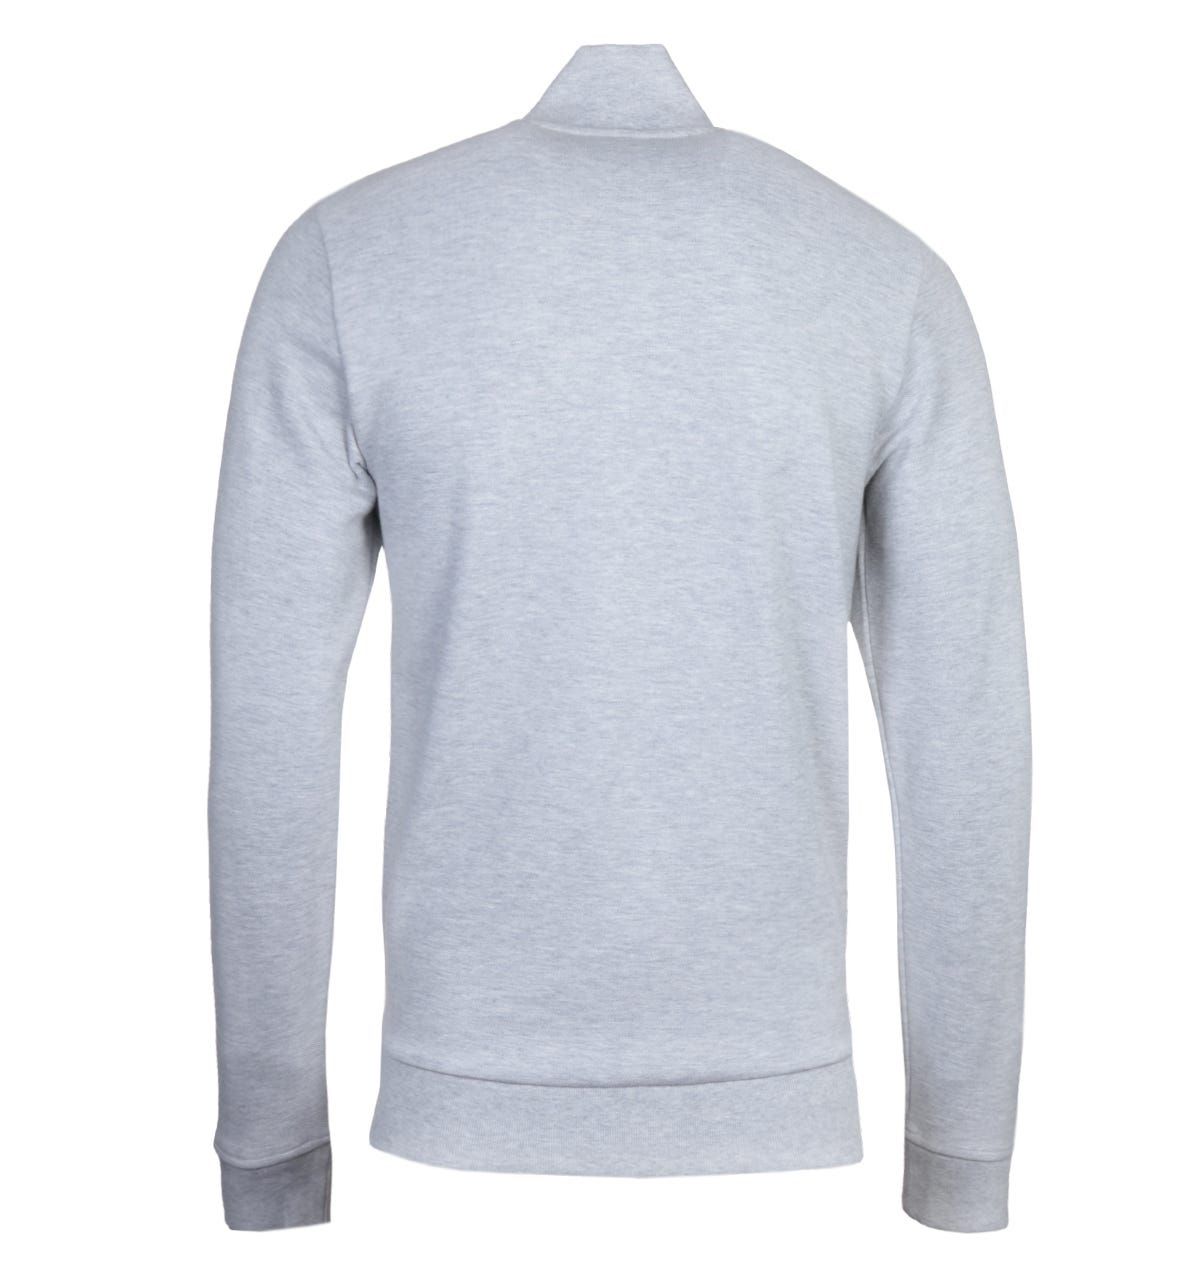 <p>A pique cotton composition crafted by Lacoste. The Lacoste Homme Grey Zip Through Sweatshirt is fitted with a full zip fastening, which also features a funnel neck for a light and comforting fit. The classic silhouette offers versatility, with the design being finished with the Lacoste logo embroidered on the chest.</p><ul><li>Pique cotton composition</li><li>Funnel neck</li><li>Zip fastening</li><li>Ribbed trims</li><li>Tonal stitching</li><li>Lacoste logo embroidered on chest</li></ul><p>Style & Fit:</p><ul><li>Regular fit</li><li>Fits true to size</li></ul><p>Fabric Composition & Care:</p><ul><li>100% Cotton</li><li>Machine wash</li></ul>